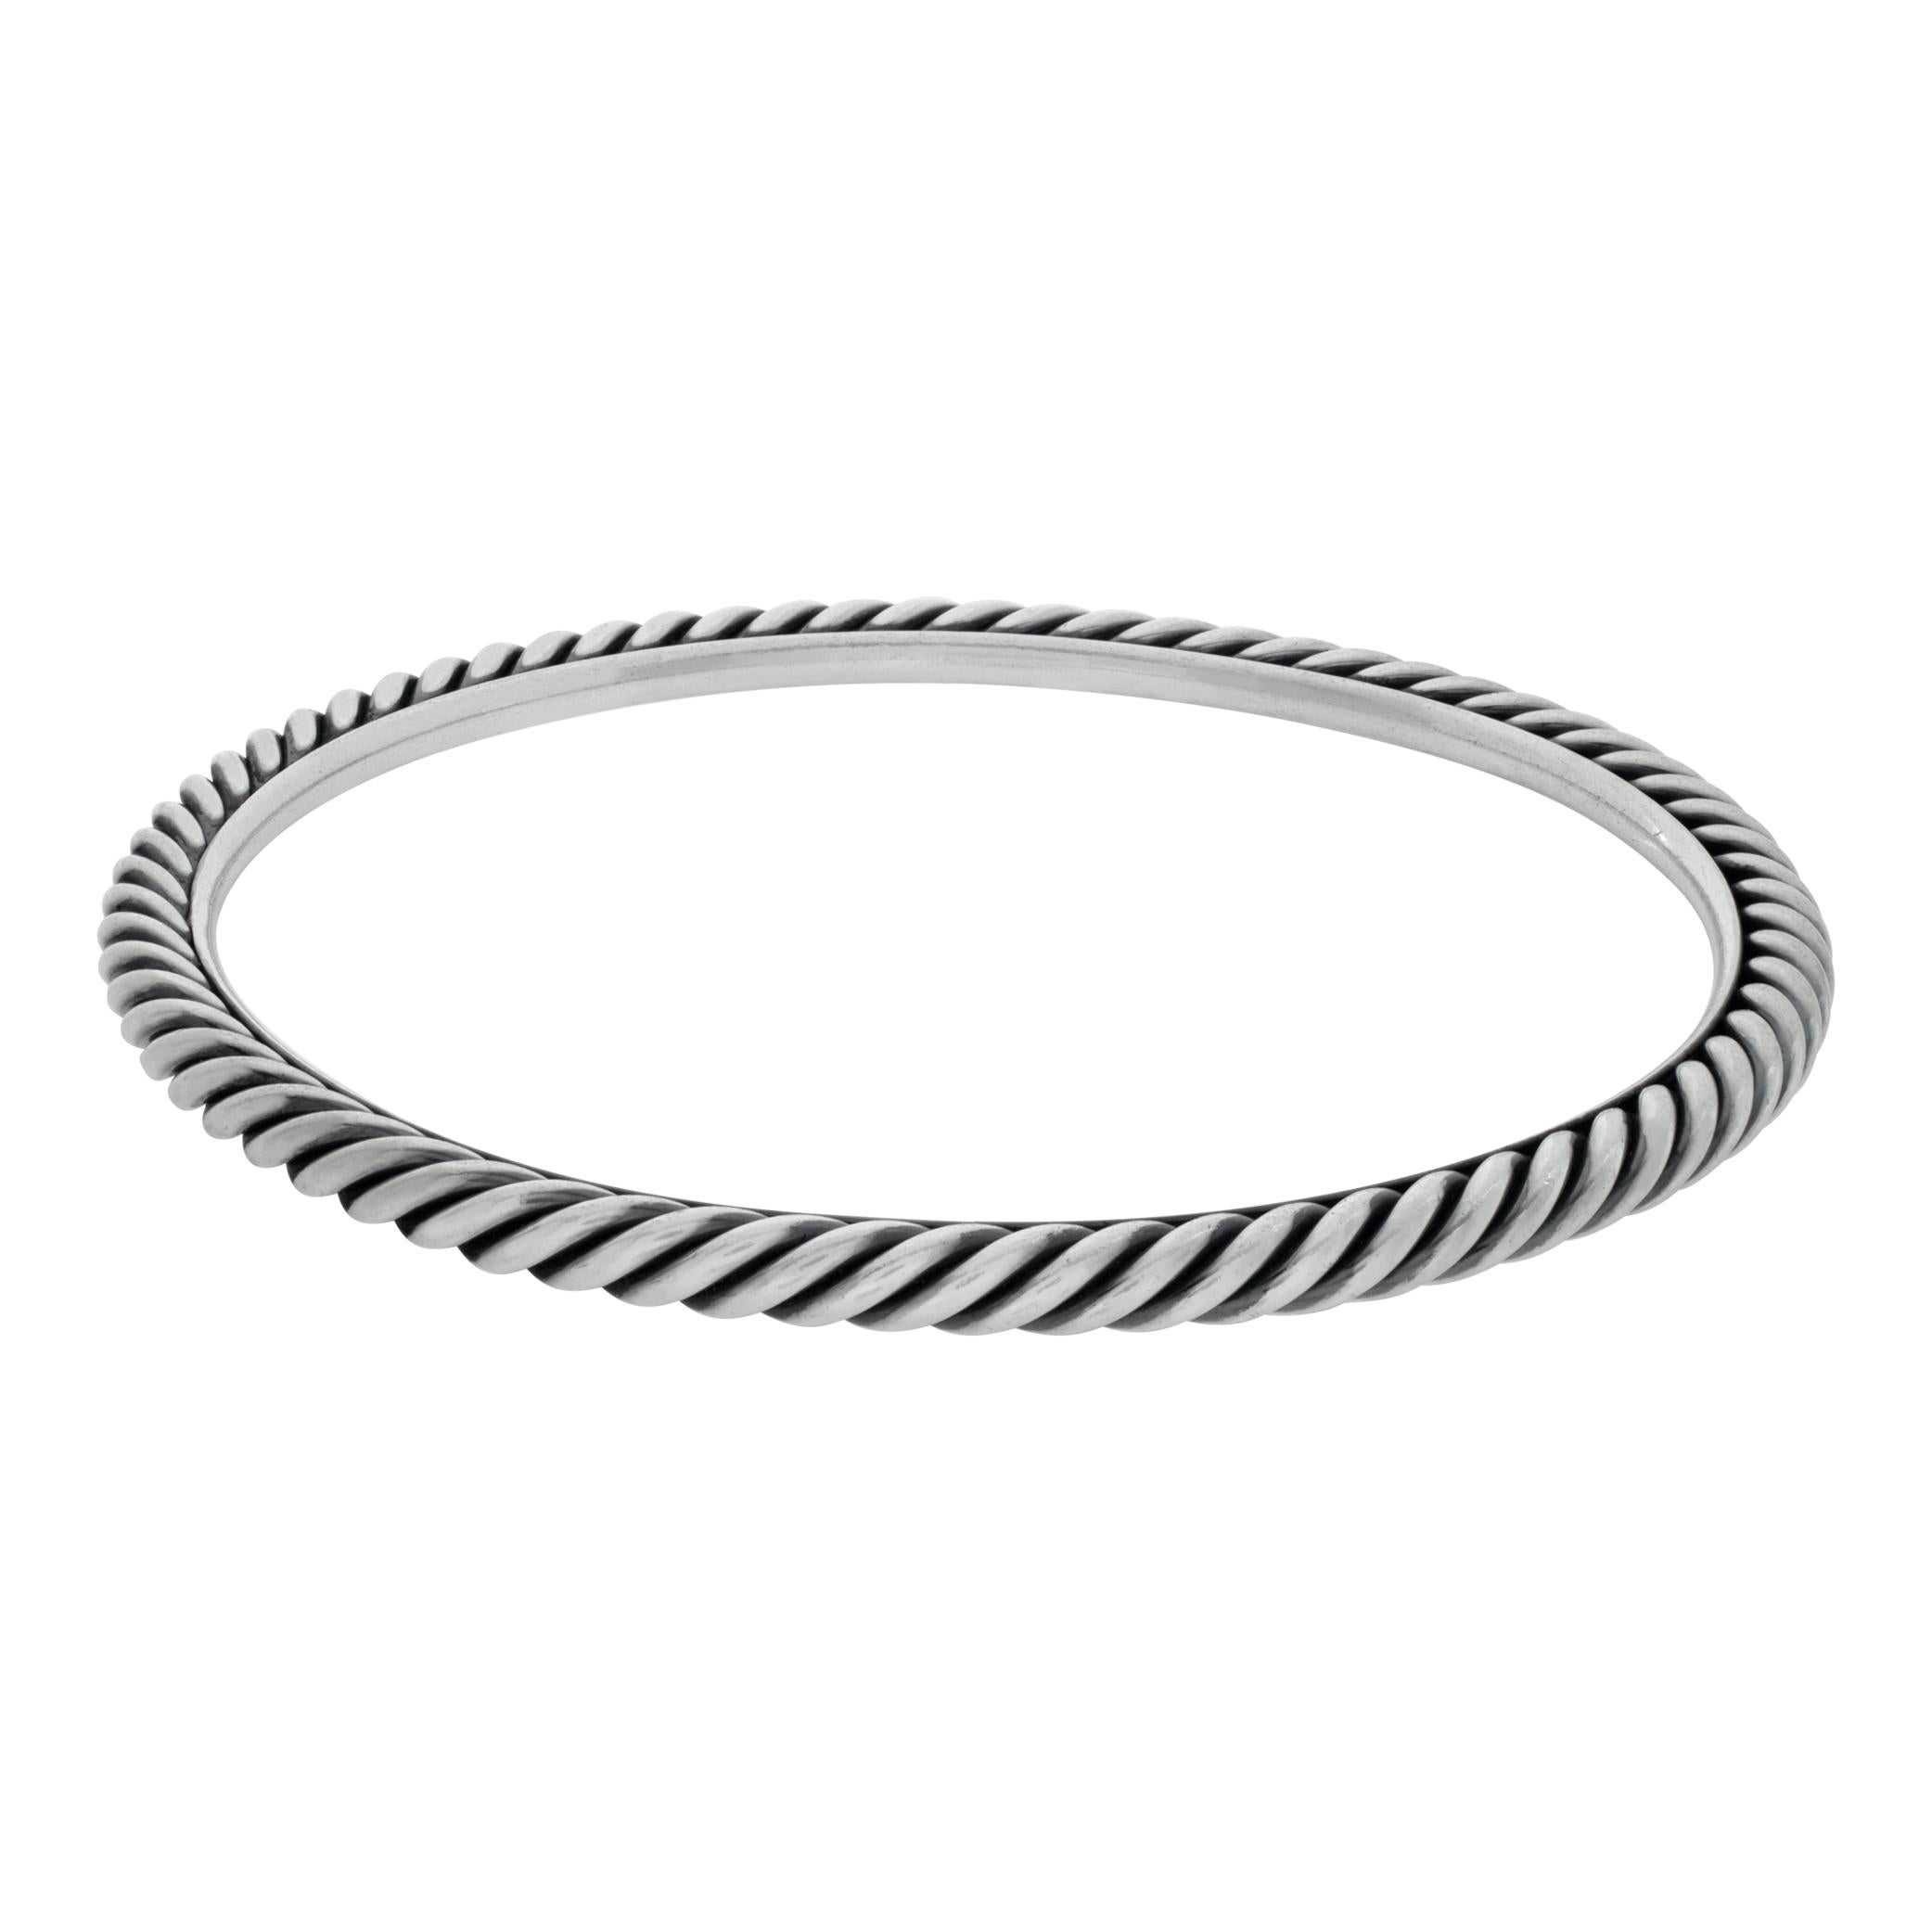 David Yurman Cable sterling silver bangle bracelet In Excellent Condition For Sale In Surfside, FL